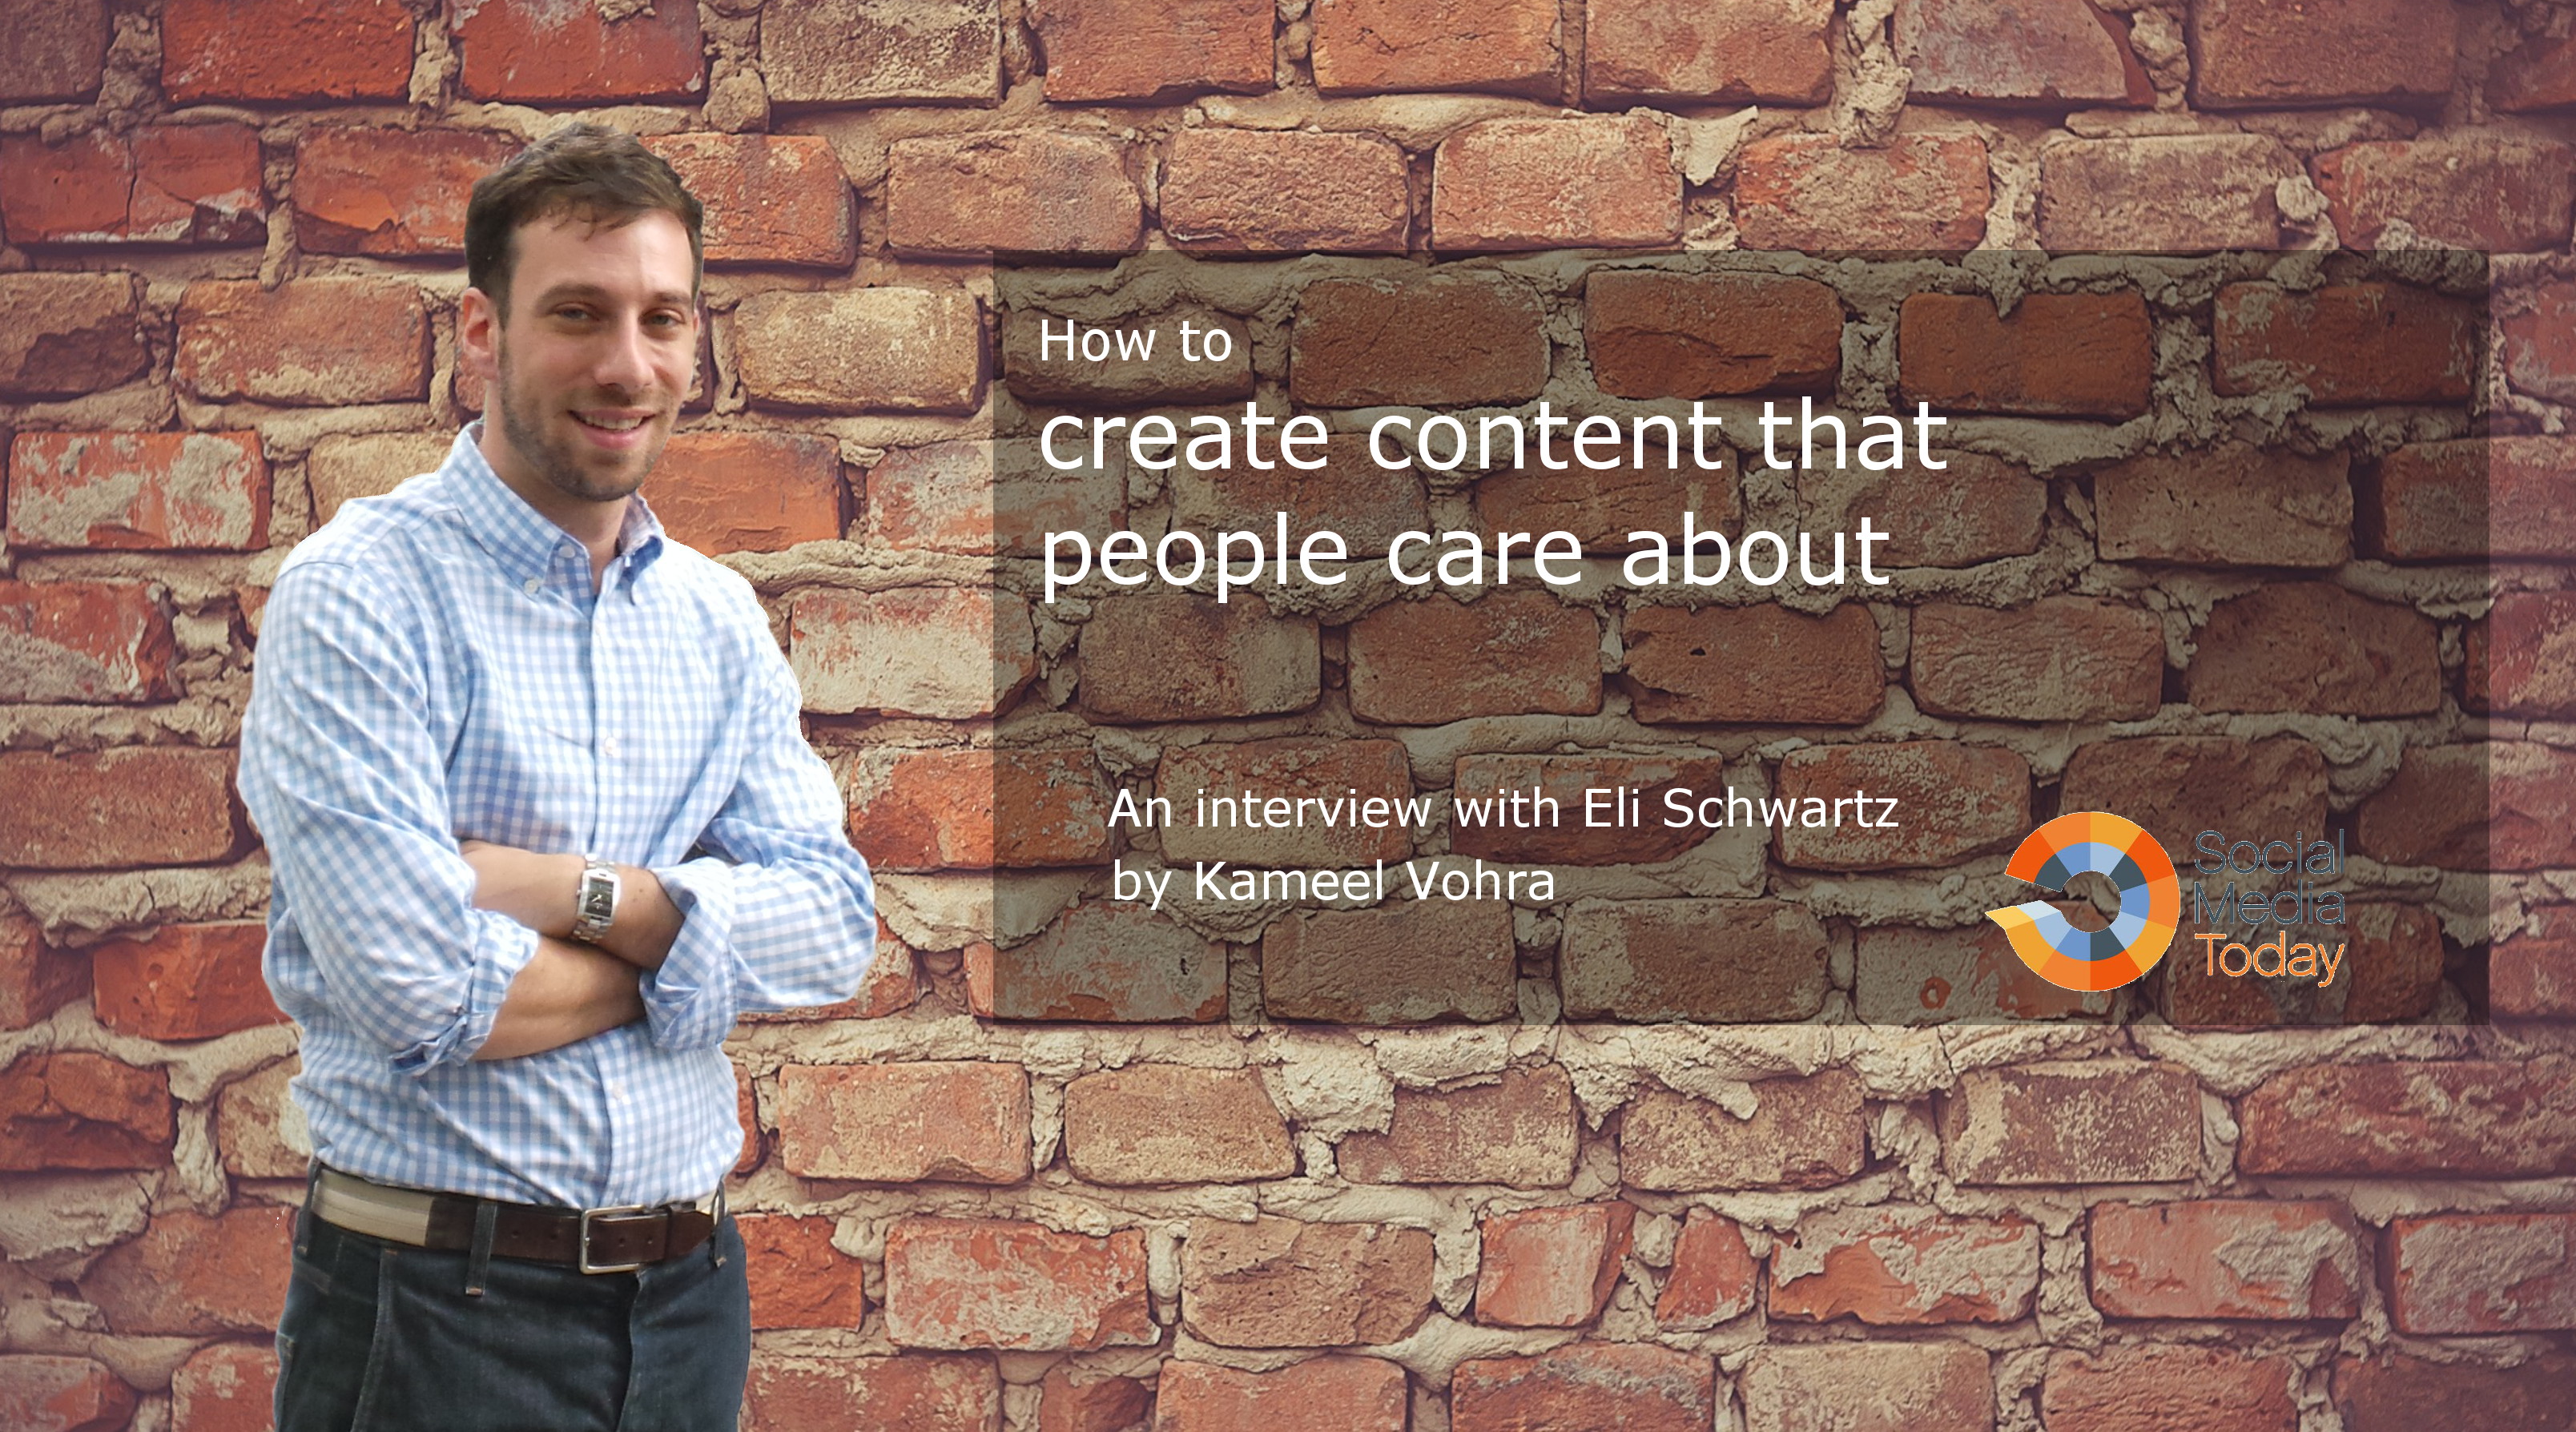 Creating content people care about